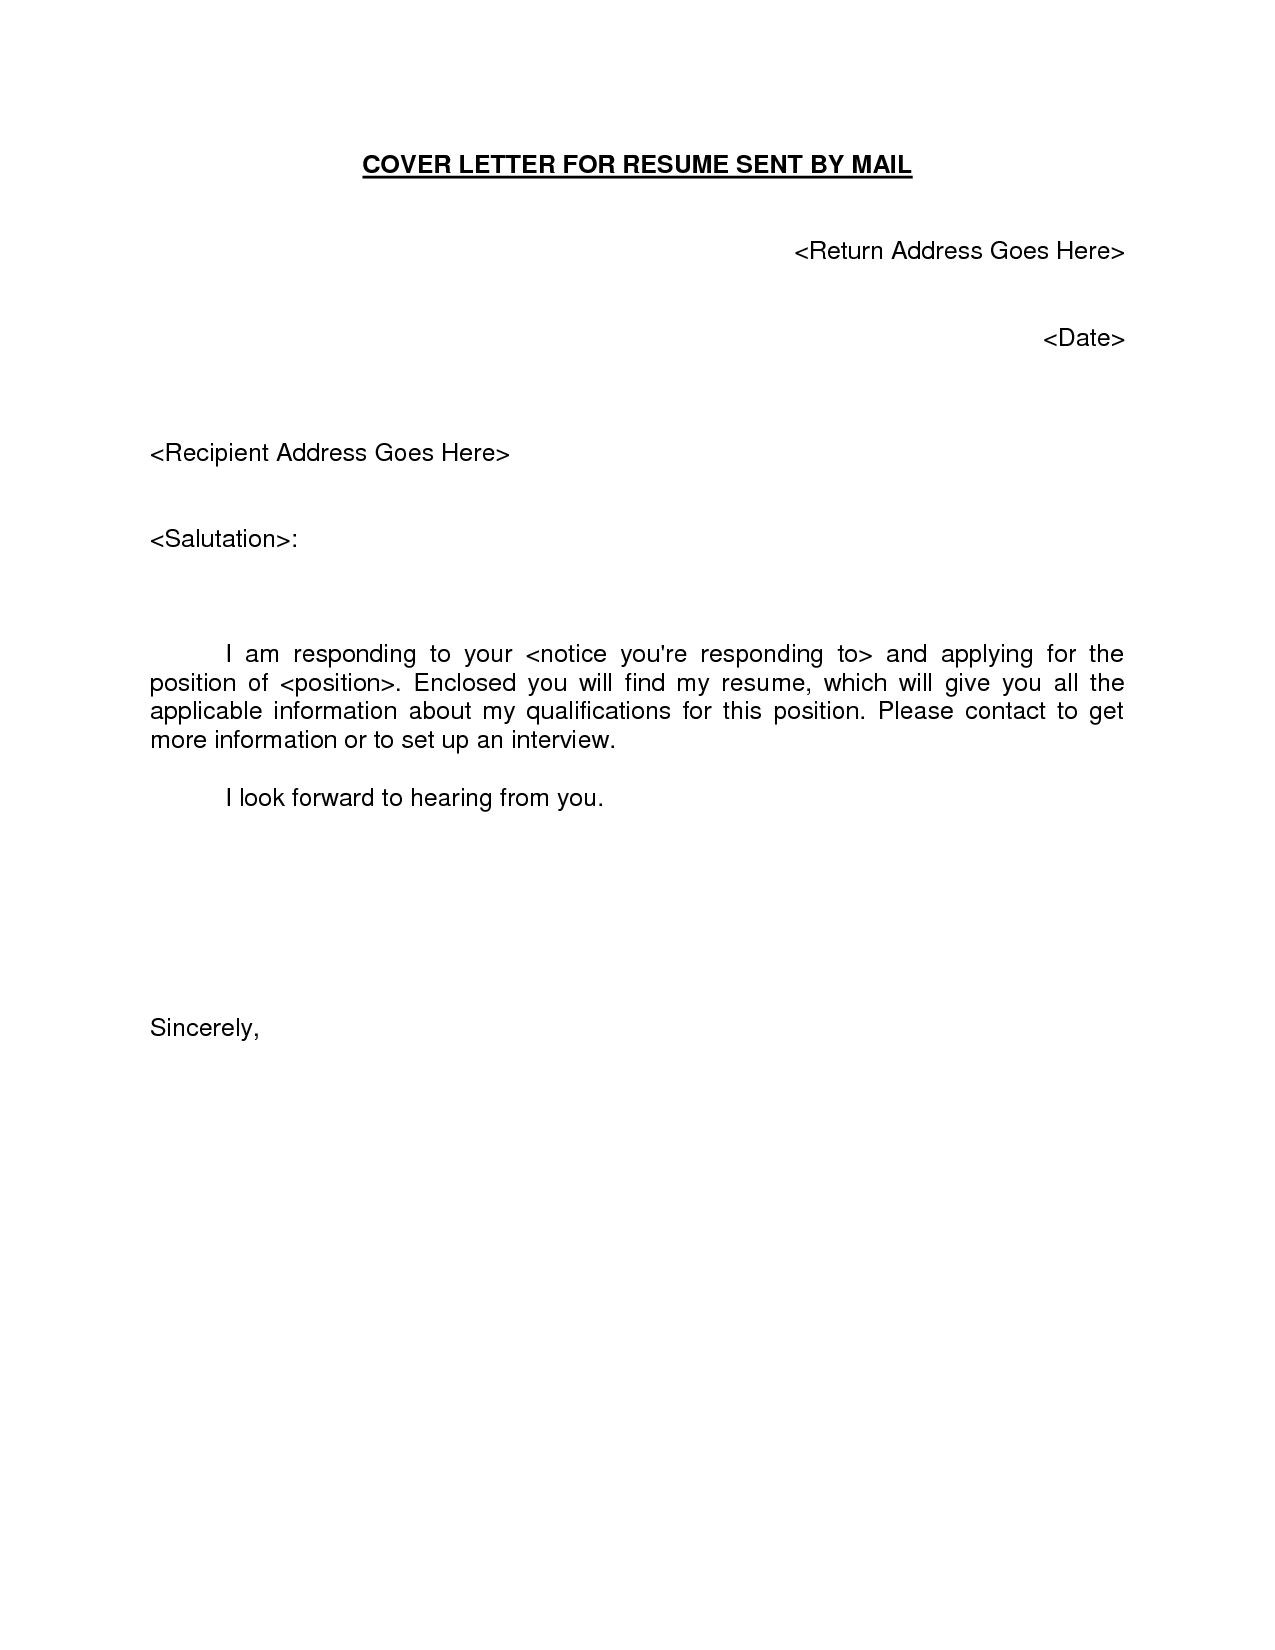 Sample Of Cover Letter for Email Resume 25lancarrezekiq Email Cover Letter Cover Letter for Resume, Email Cover …